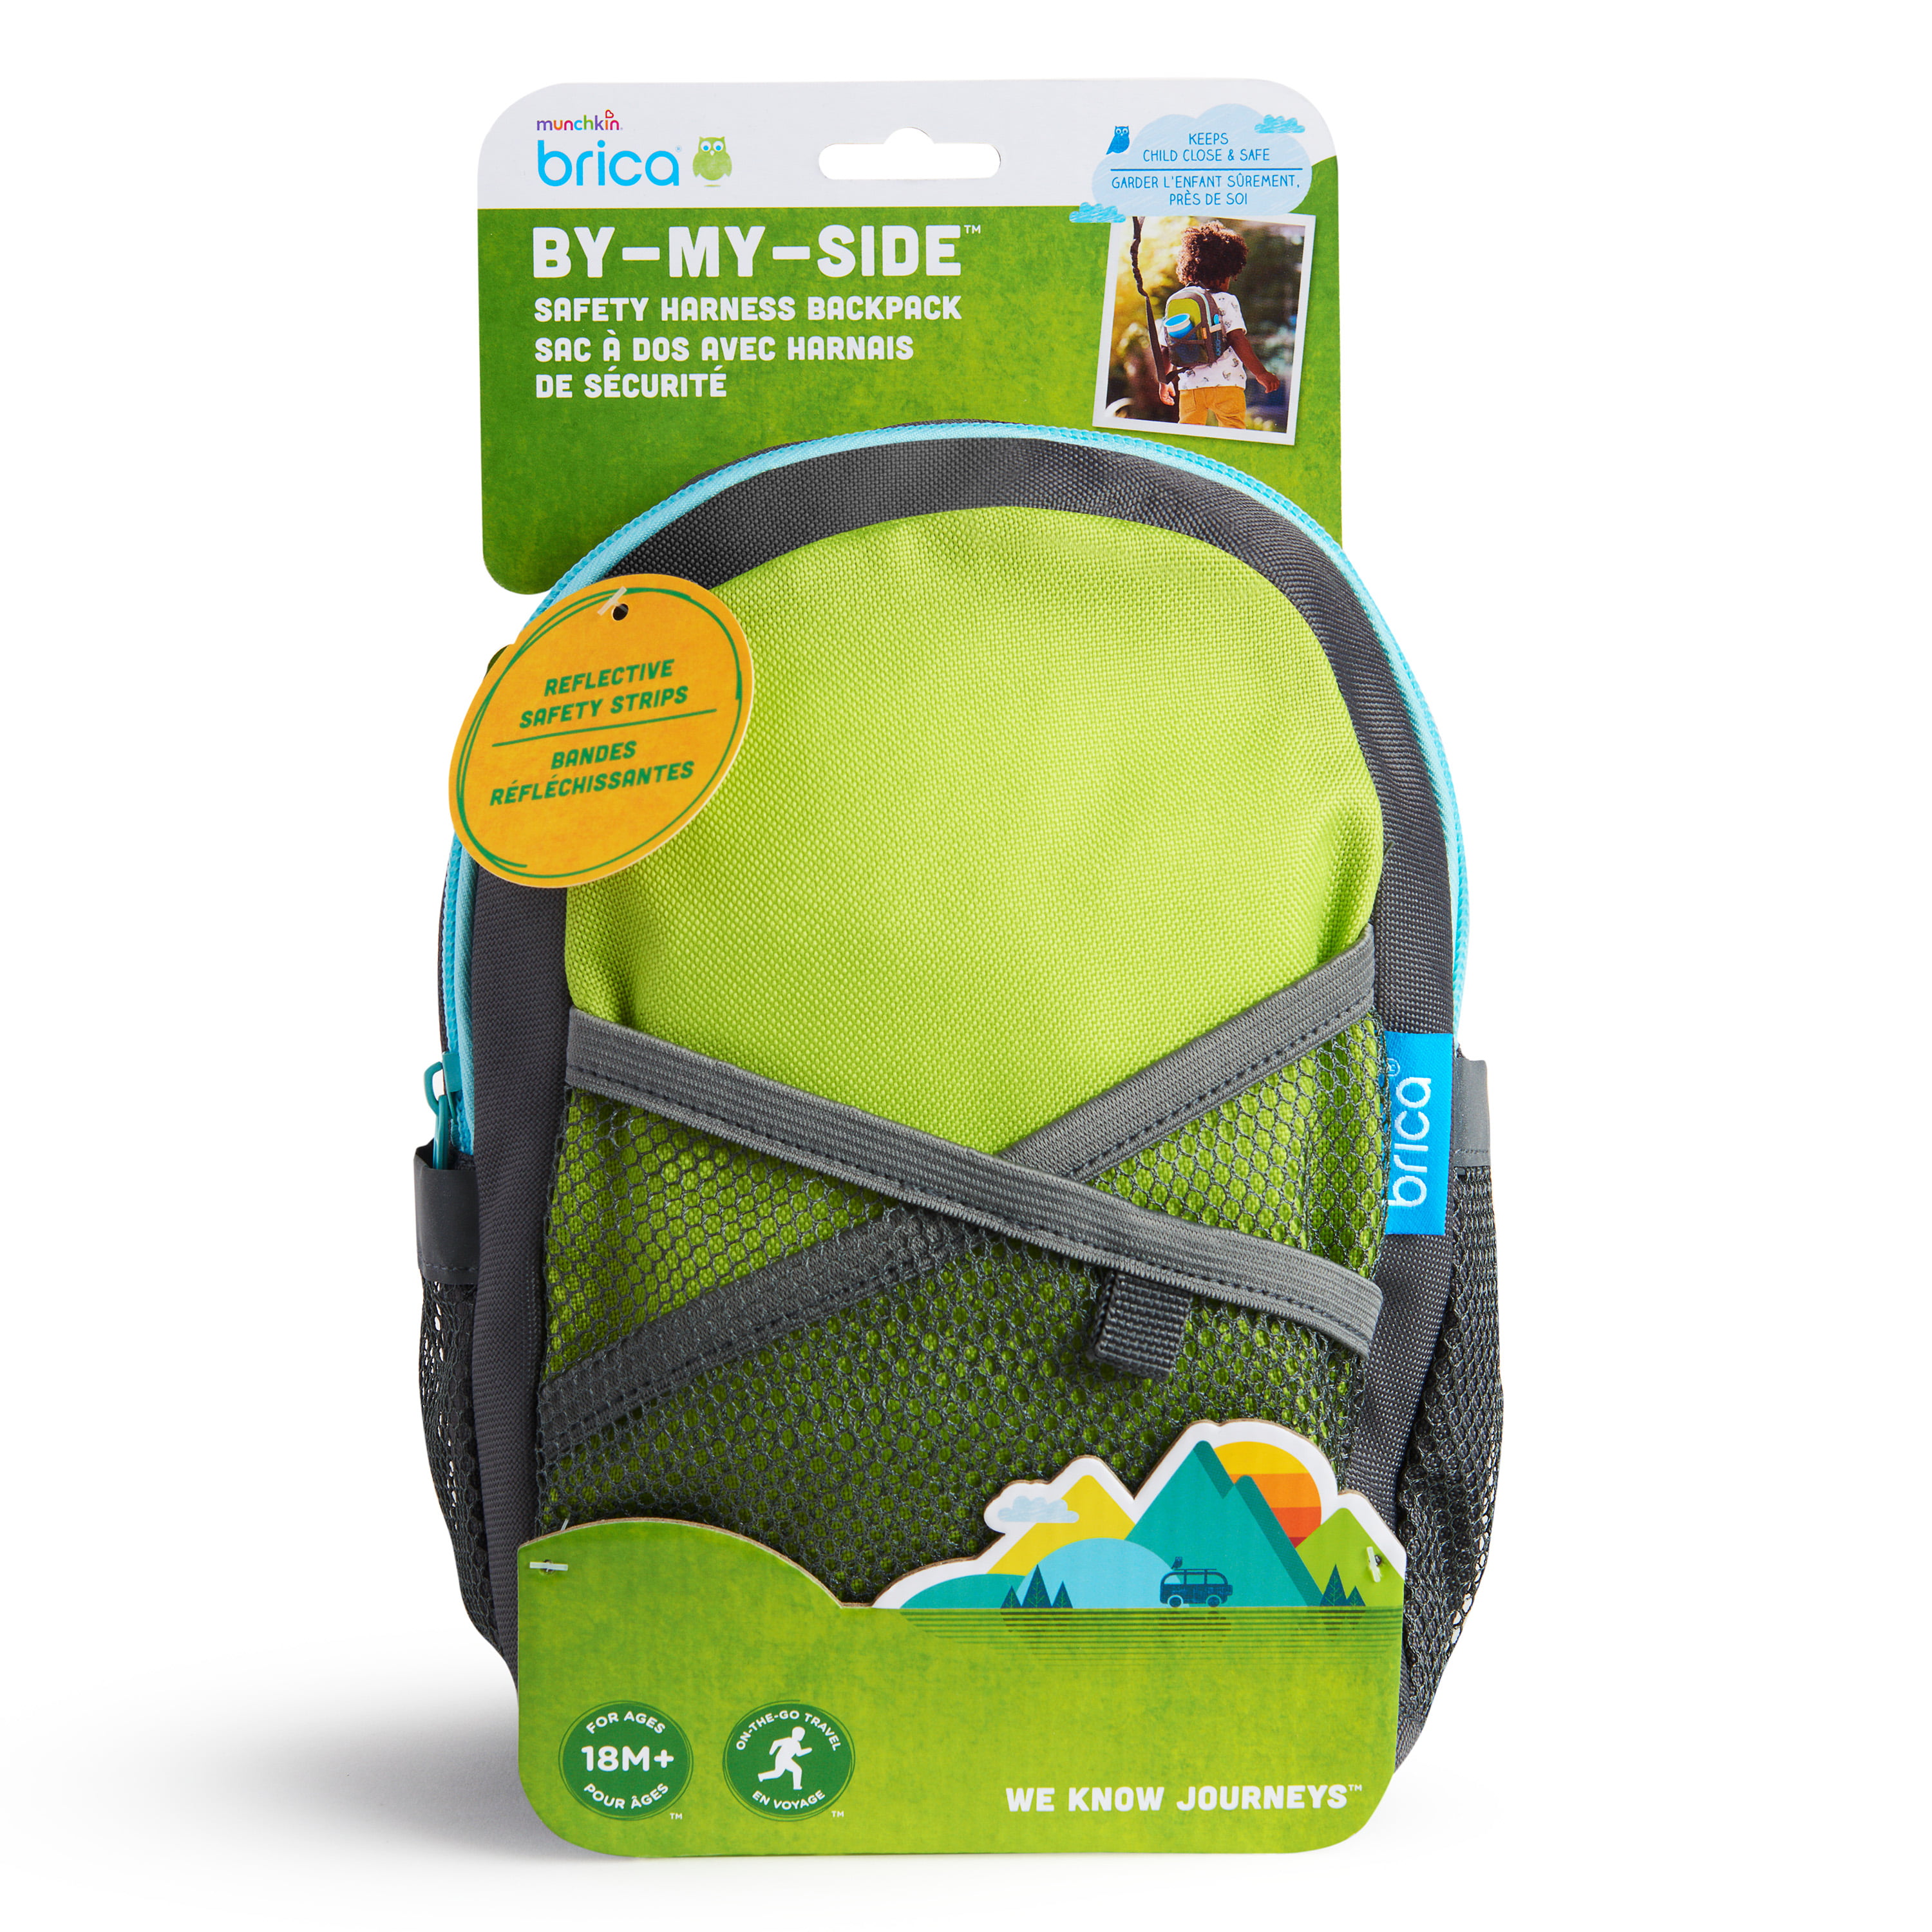 Munchkin Brica By-My-Side Safety Harness Backpack, Includes